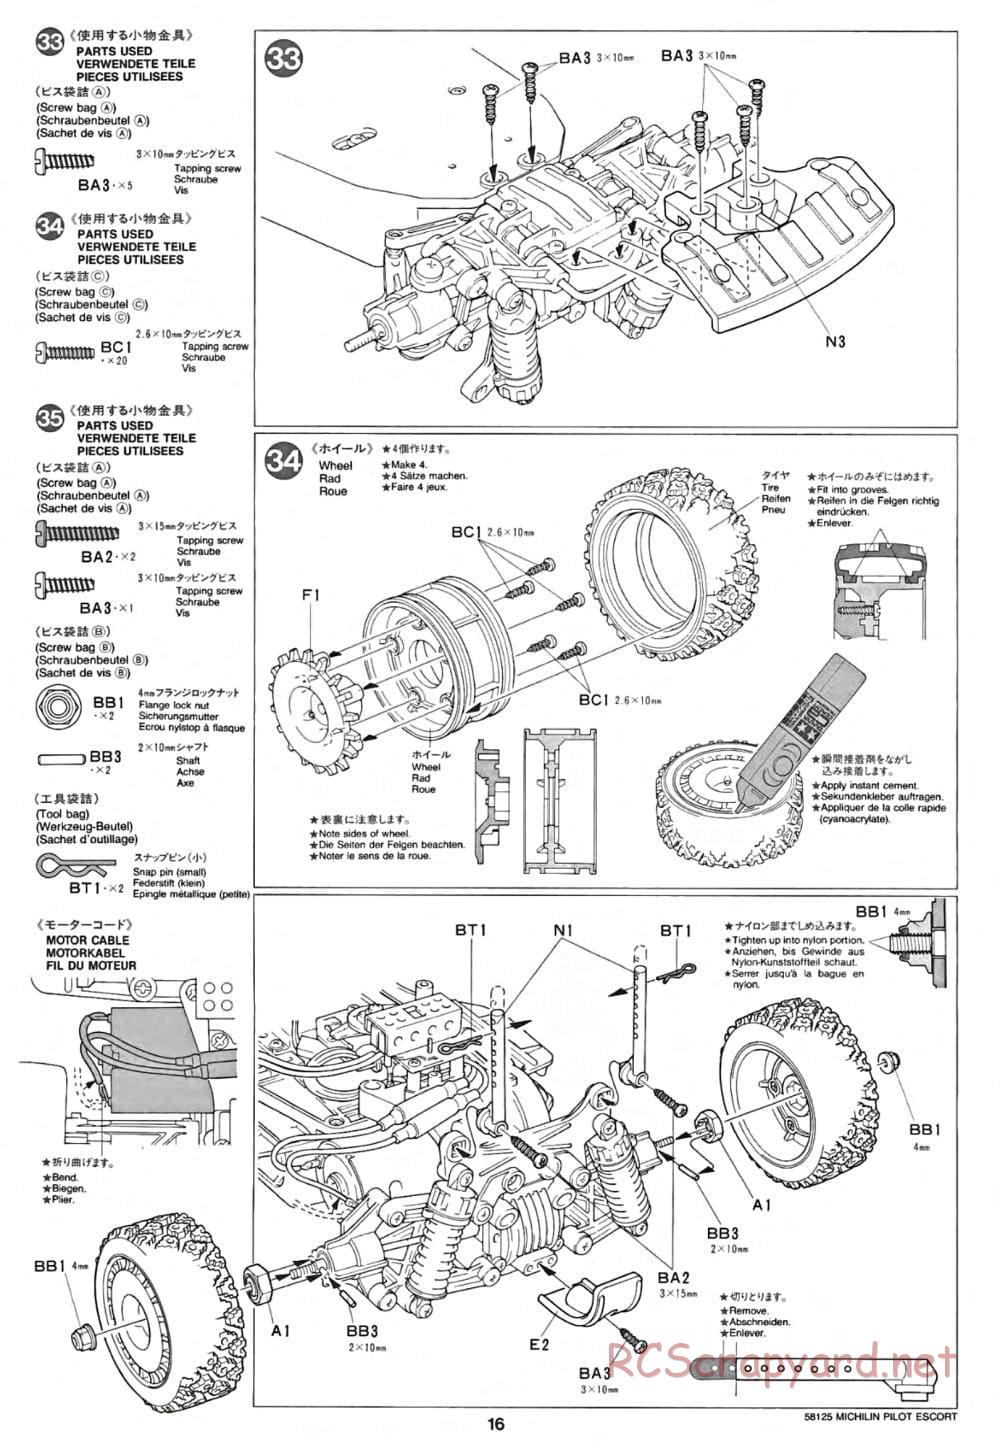 Tamiya - Michelin Pilot Ford Escort RS Cosworth - TA-01 Chassis - Manual - Page 16